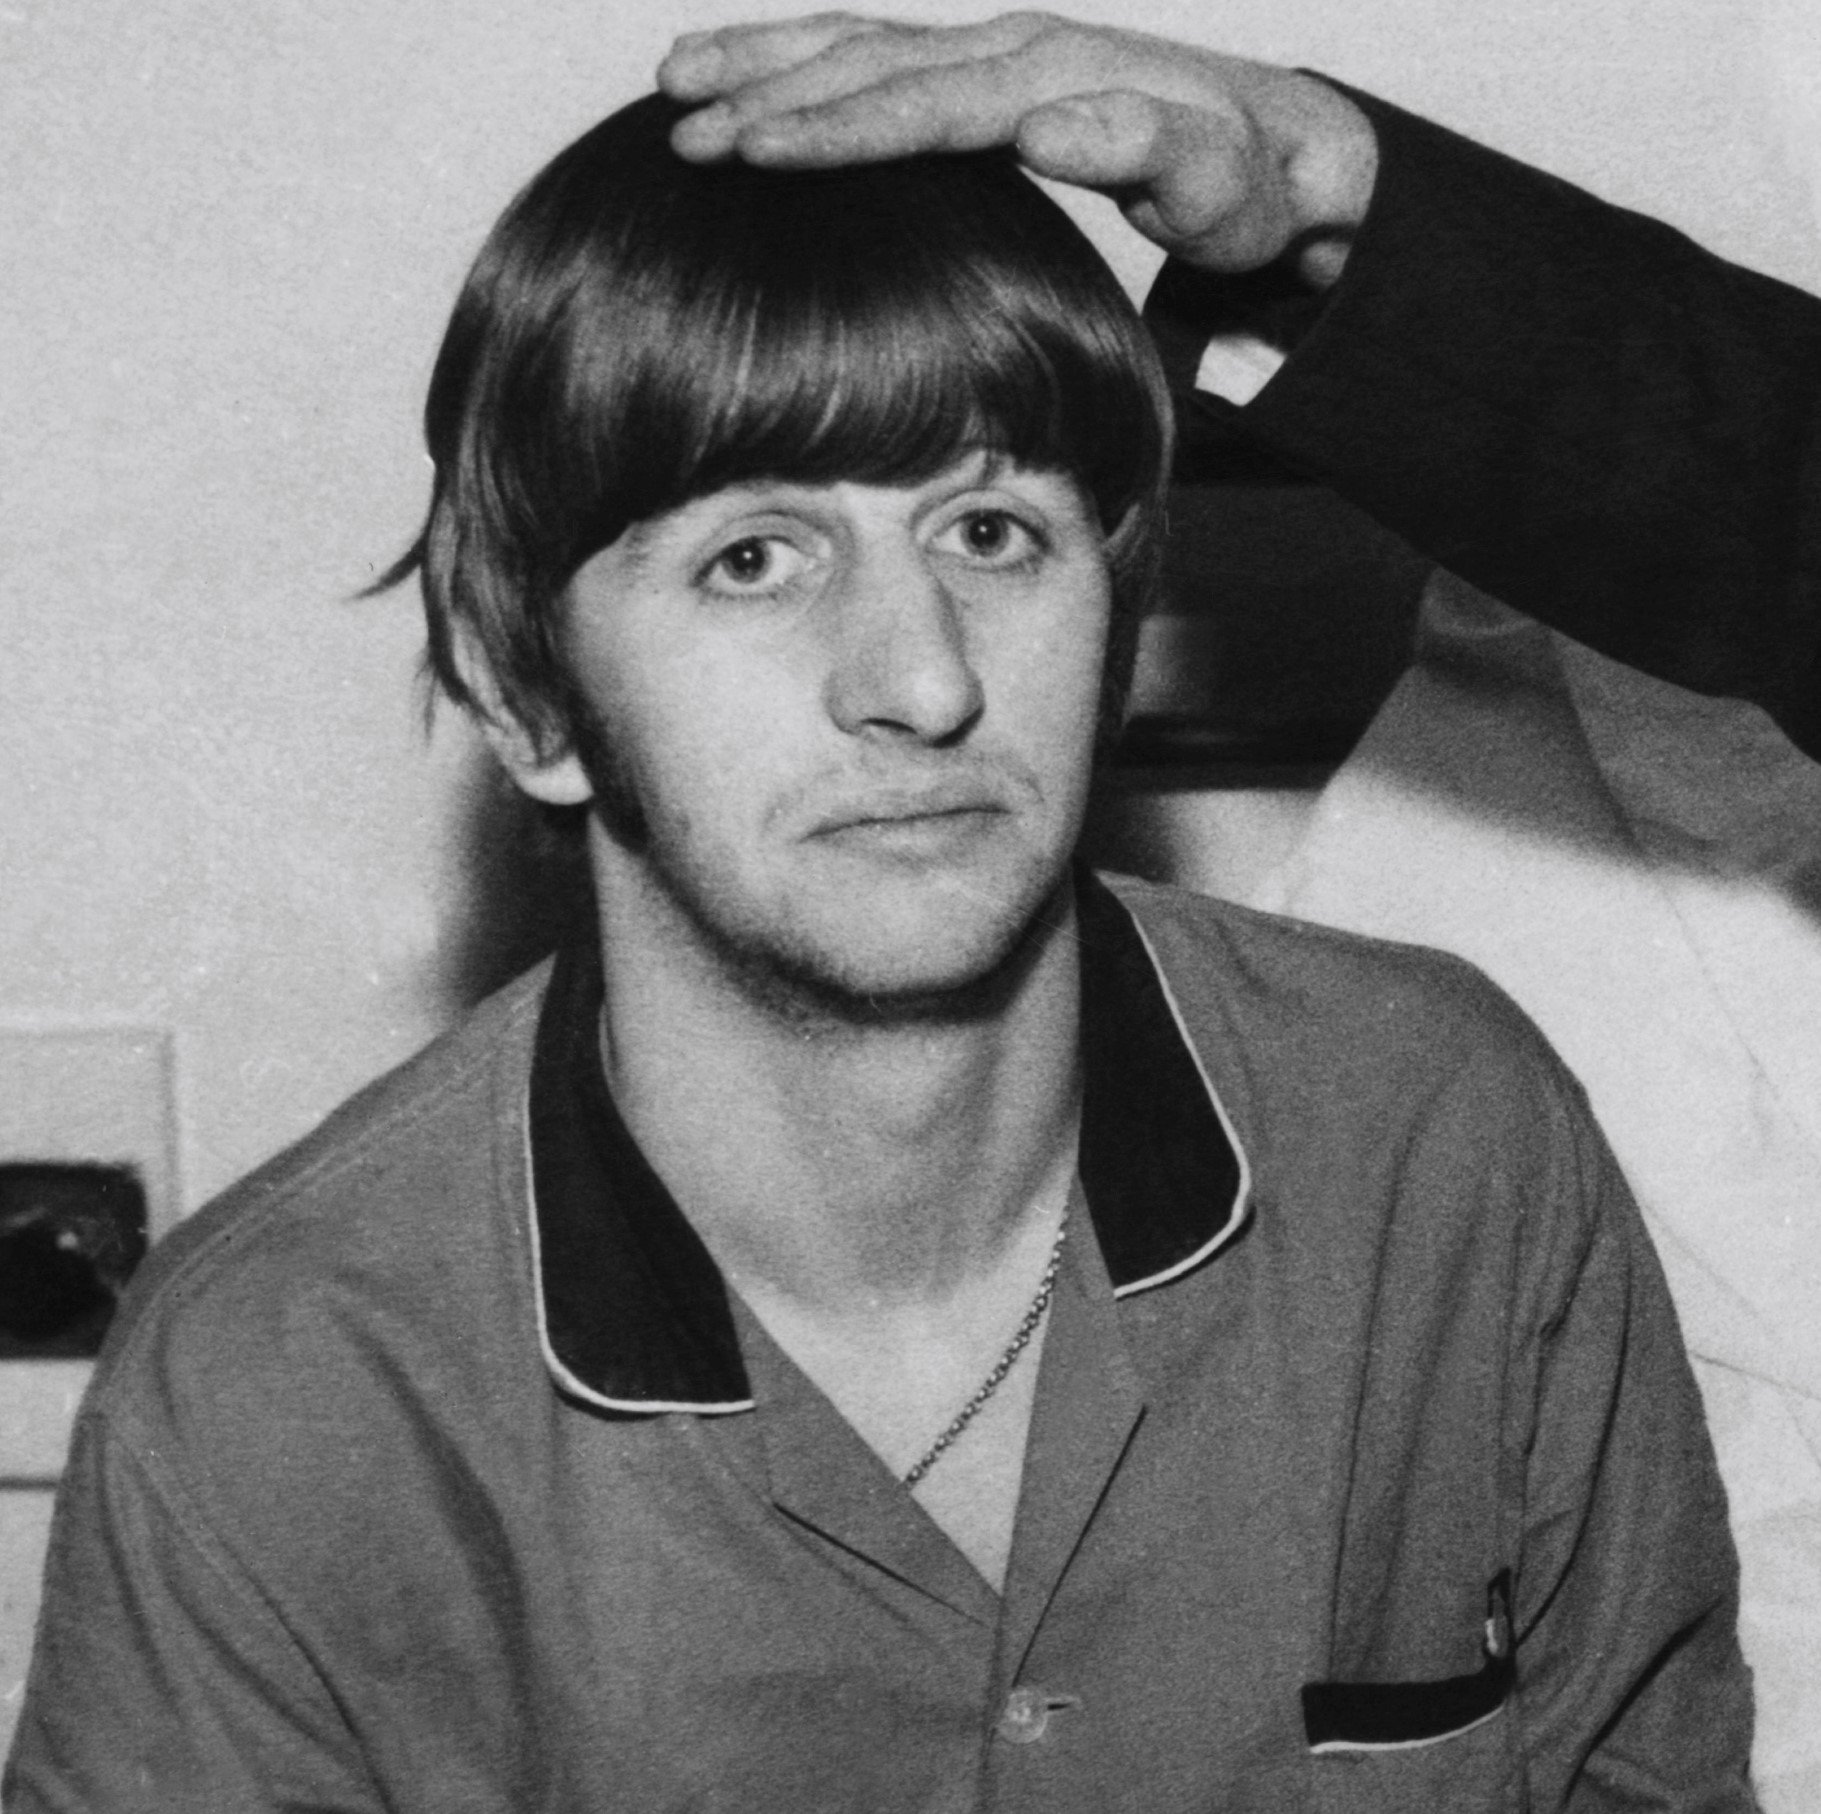 Ringo Starr Said 'Back Off Boogaloo' Was a 'Fabulous' Accident